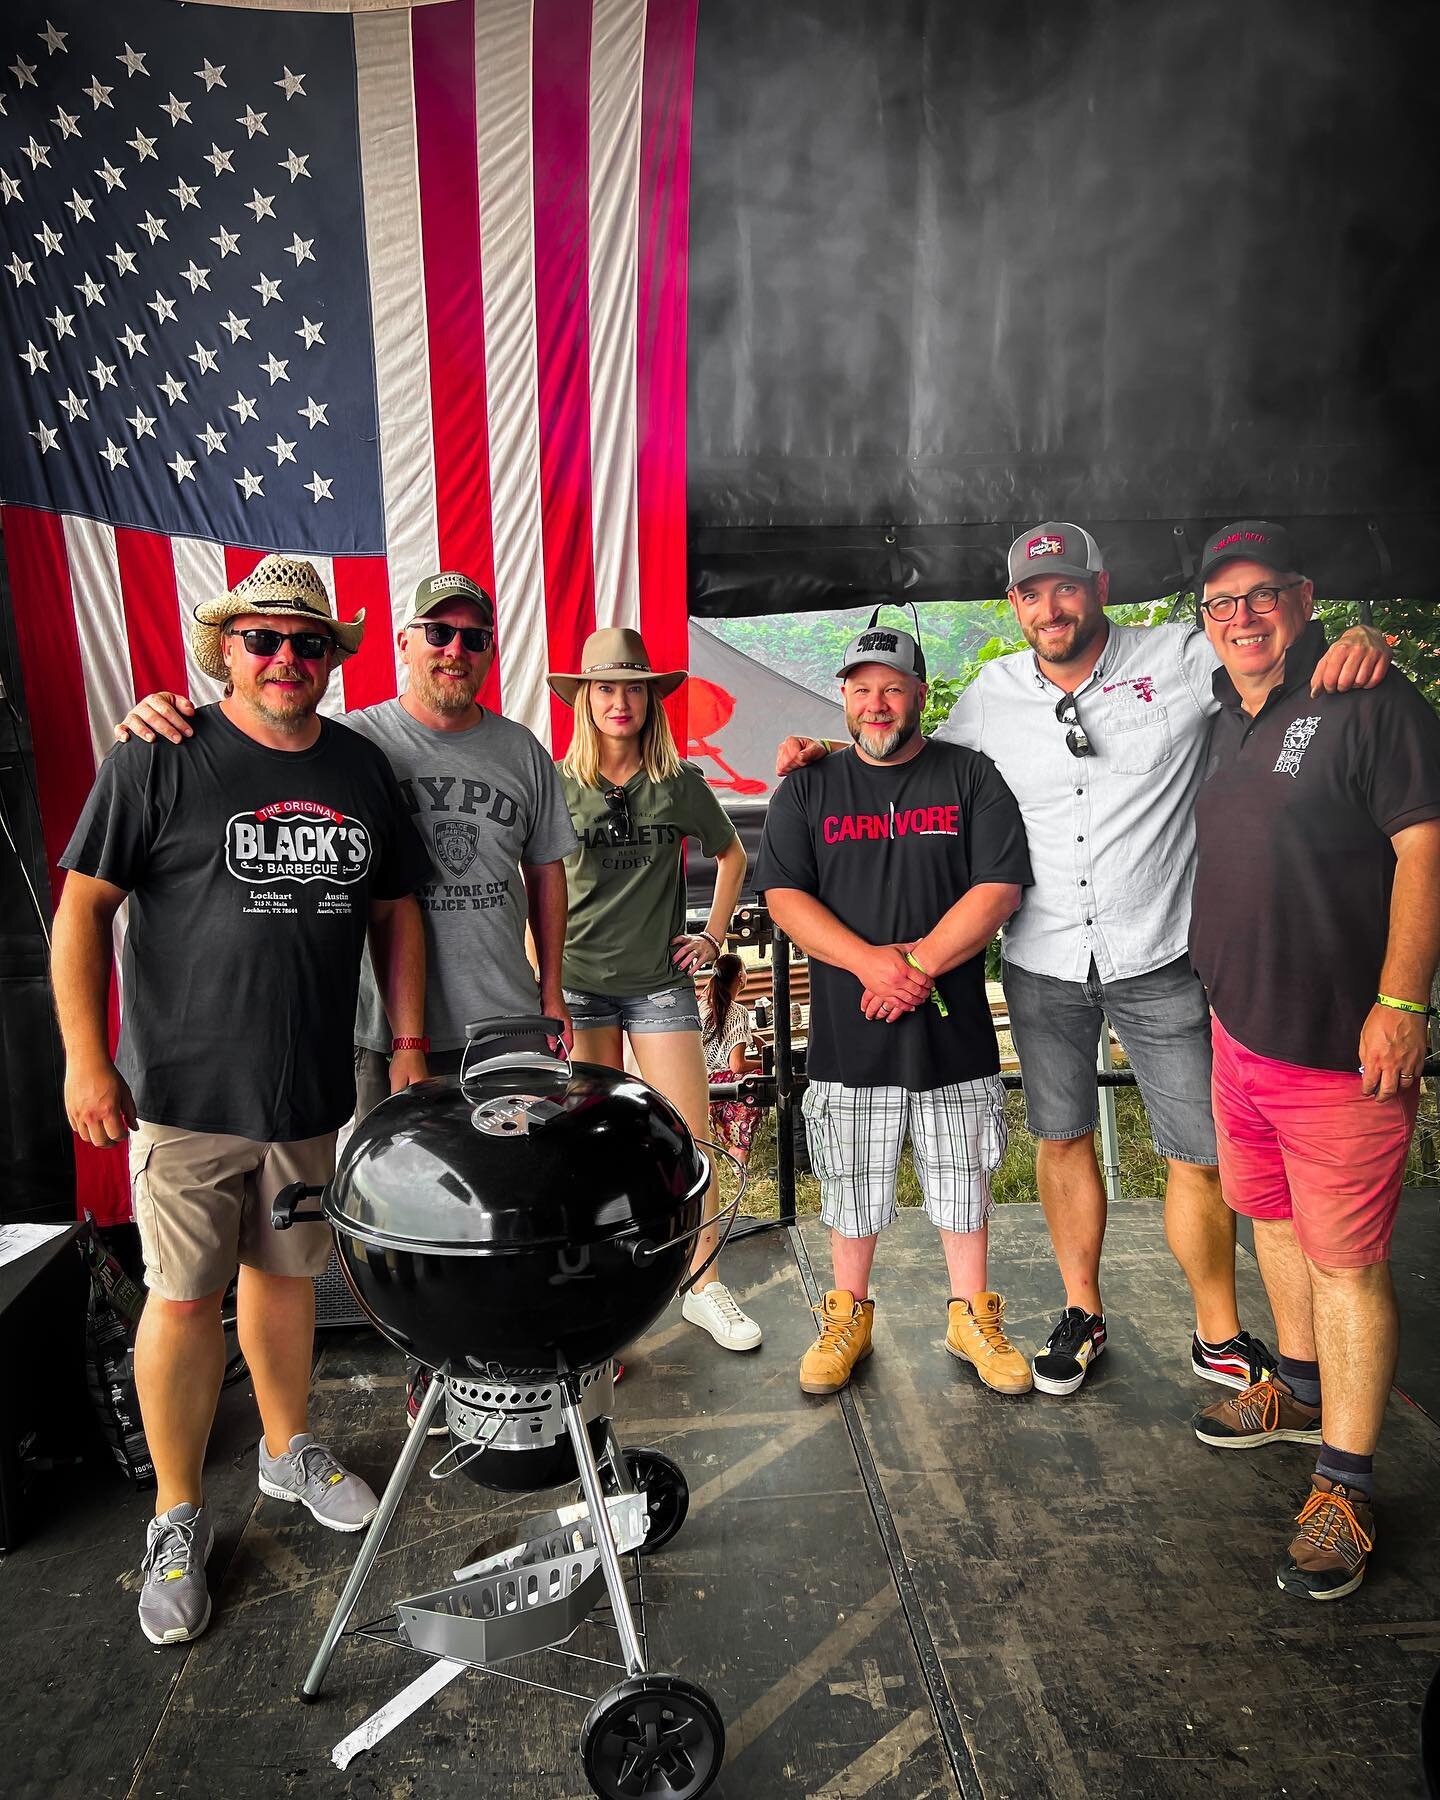 HUGE shout out to this Motley crew of volunteers on the Live Fire stage at @blackdeerfest this year, many of whom are long time BBQ buddies. I&rsquo;ve never seen slicker stage changeovers but not only that, I loved every minute of hanging out backst